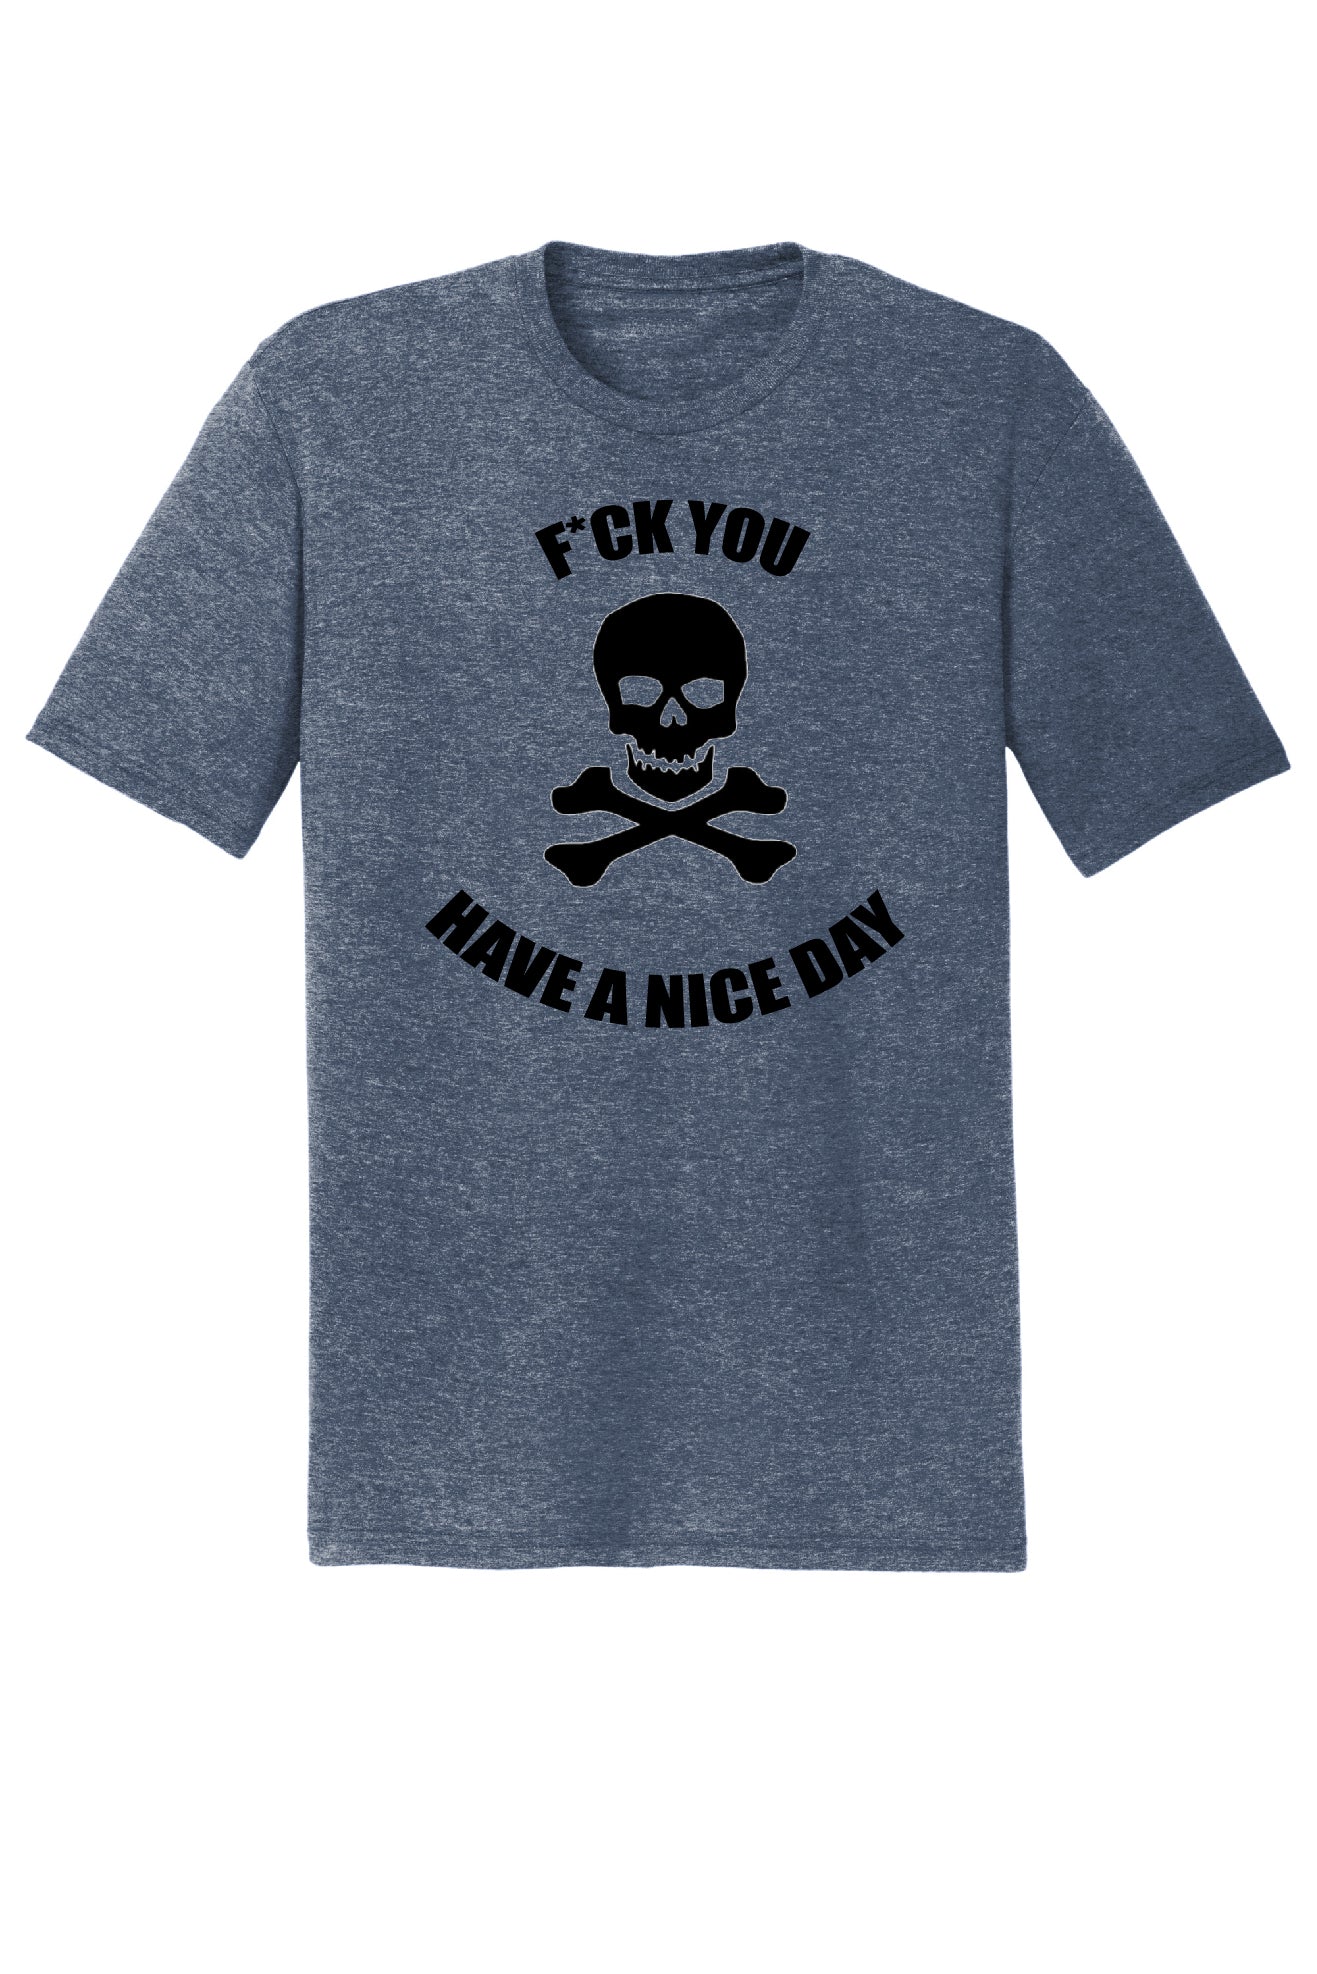 F*CK YOU, Have a Nice Day, Skull Tee